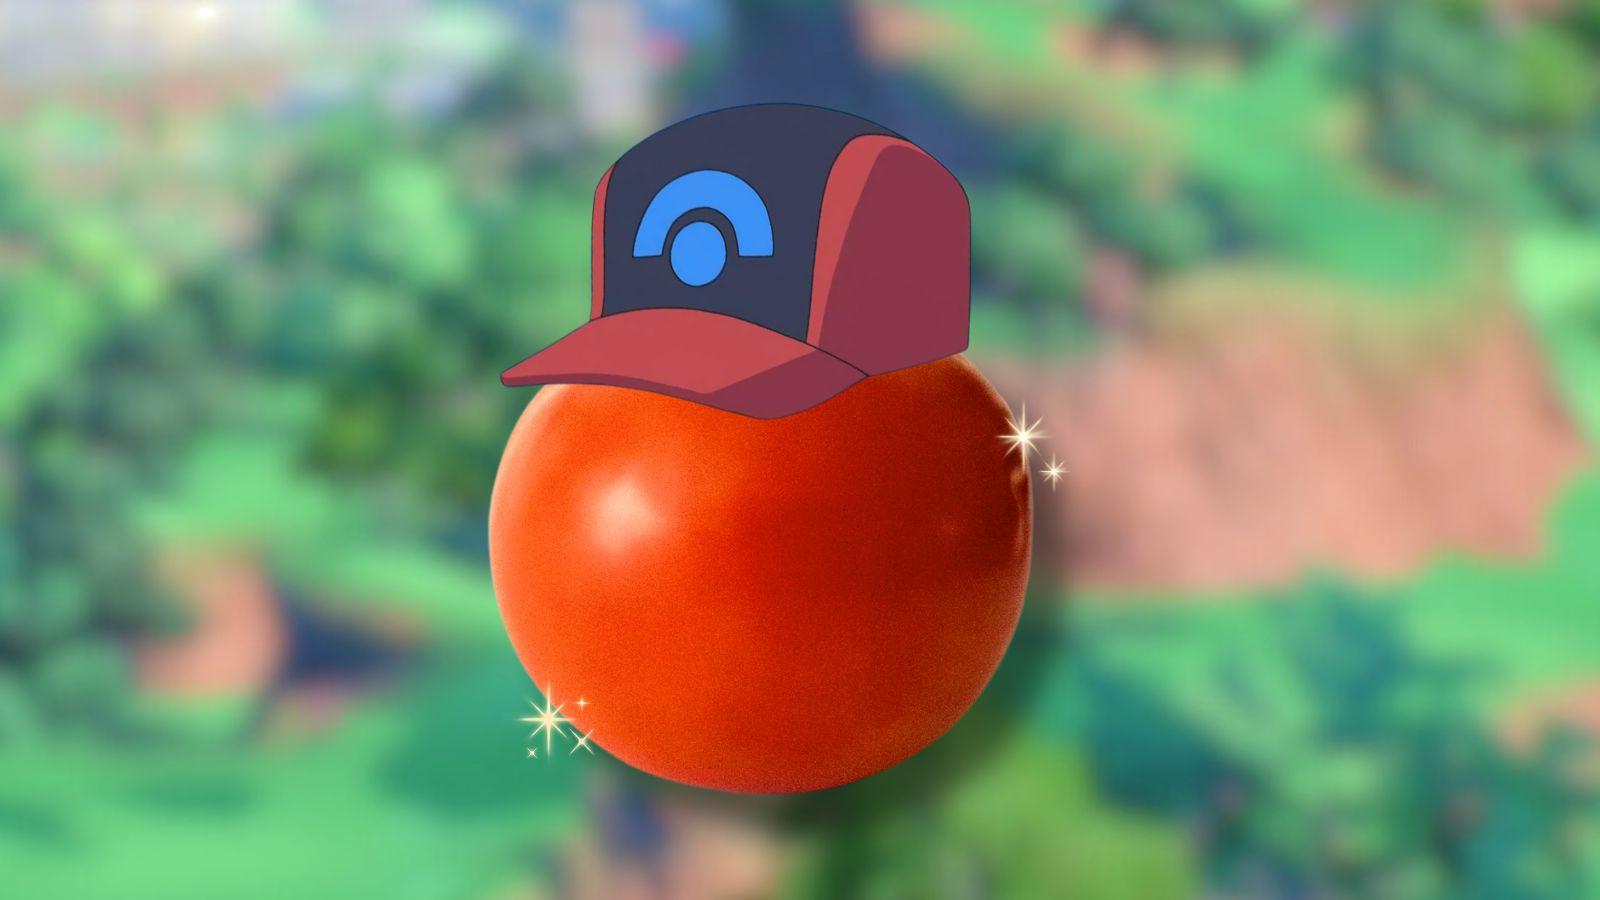 Tomato wearing Ash Ketchum's hat with Pokemon video game background.